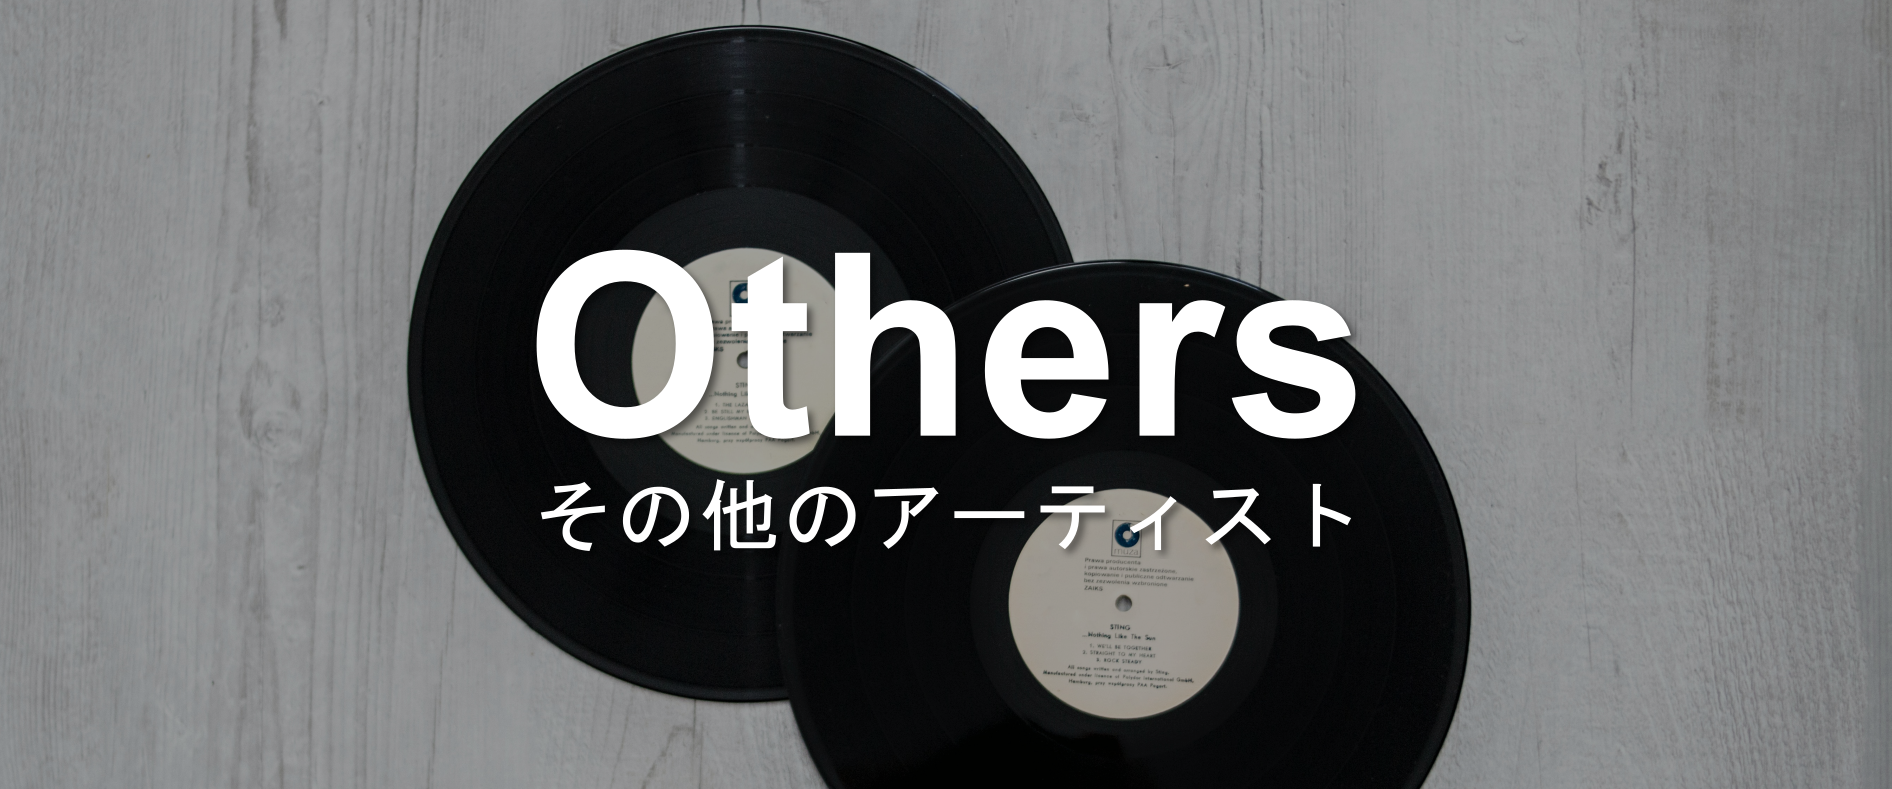 Others　その他のアーティスト